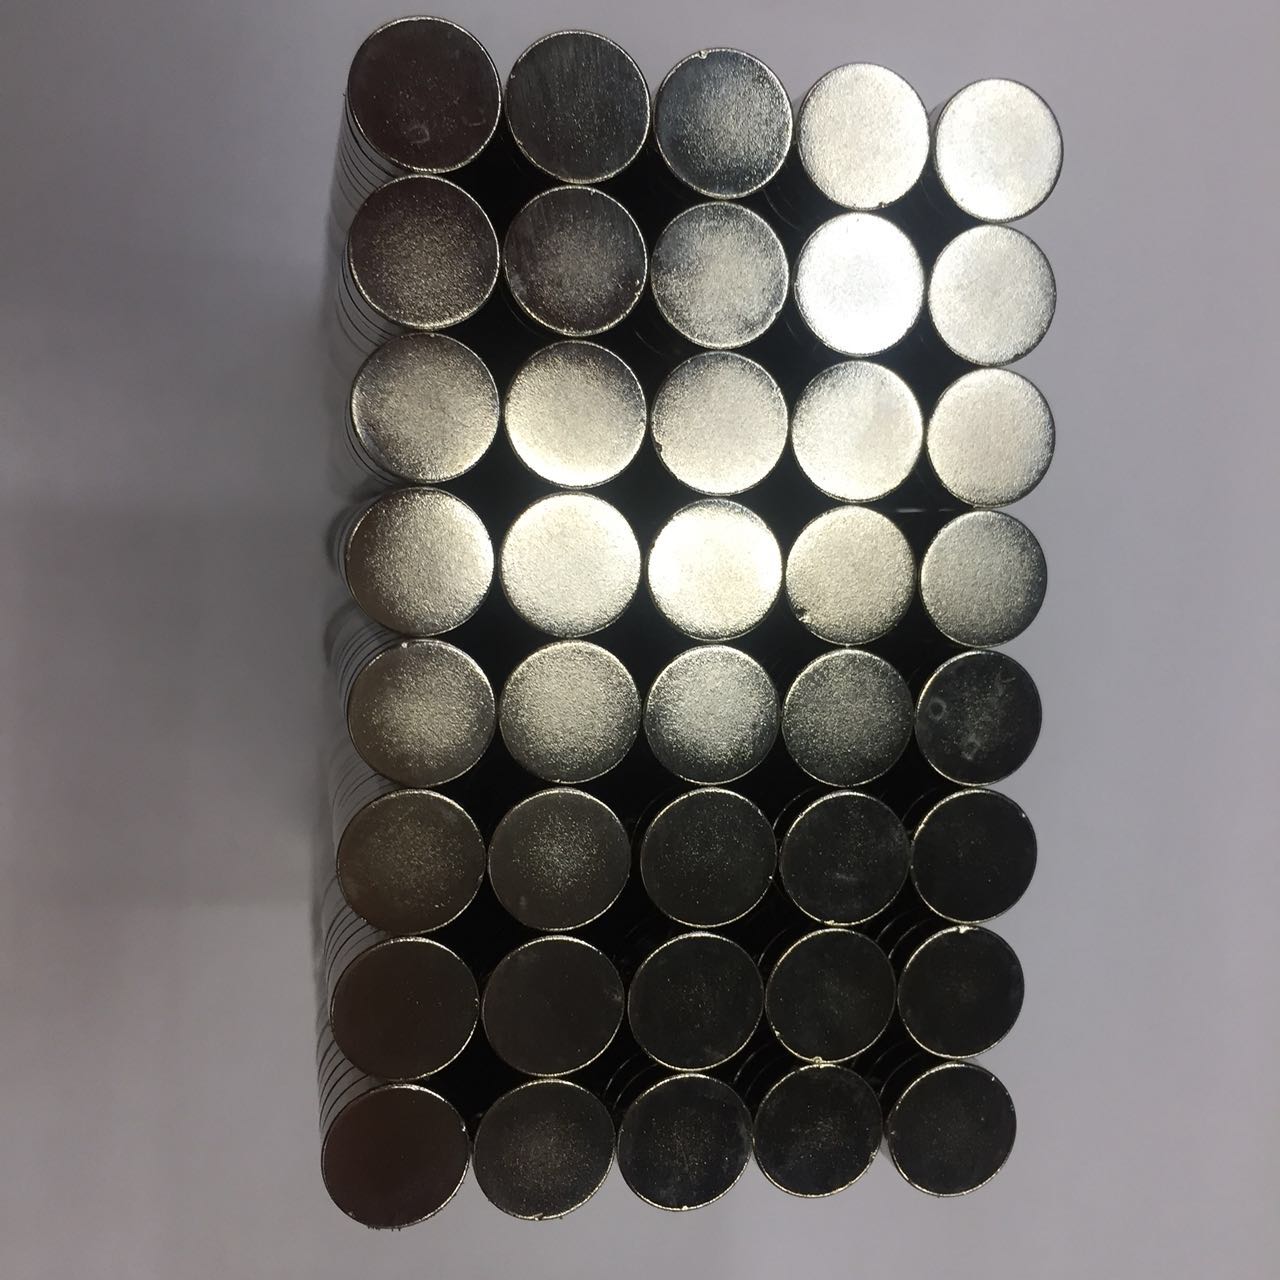 Manufacturers direct sales of 10*3MM nickel-plated magnet for nickel-plated magnet with nickel-plated magnet.